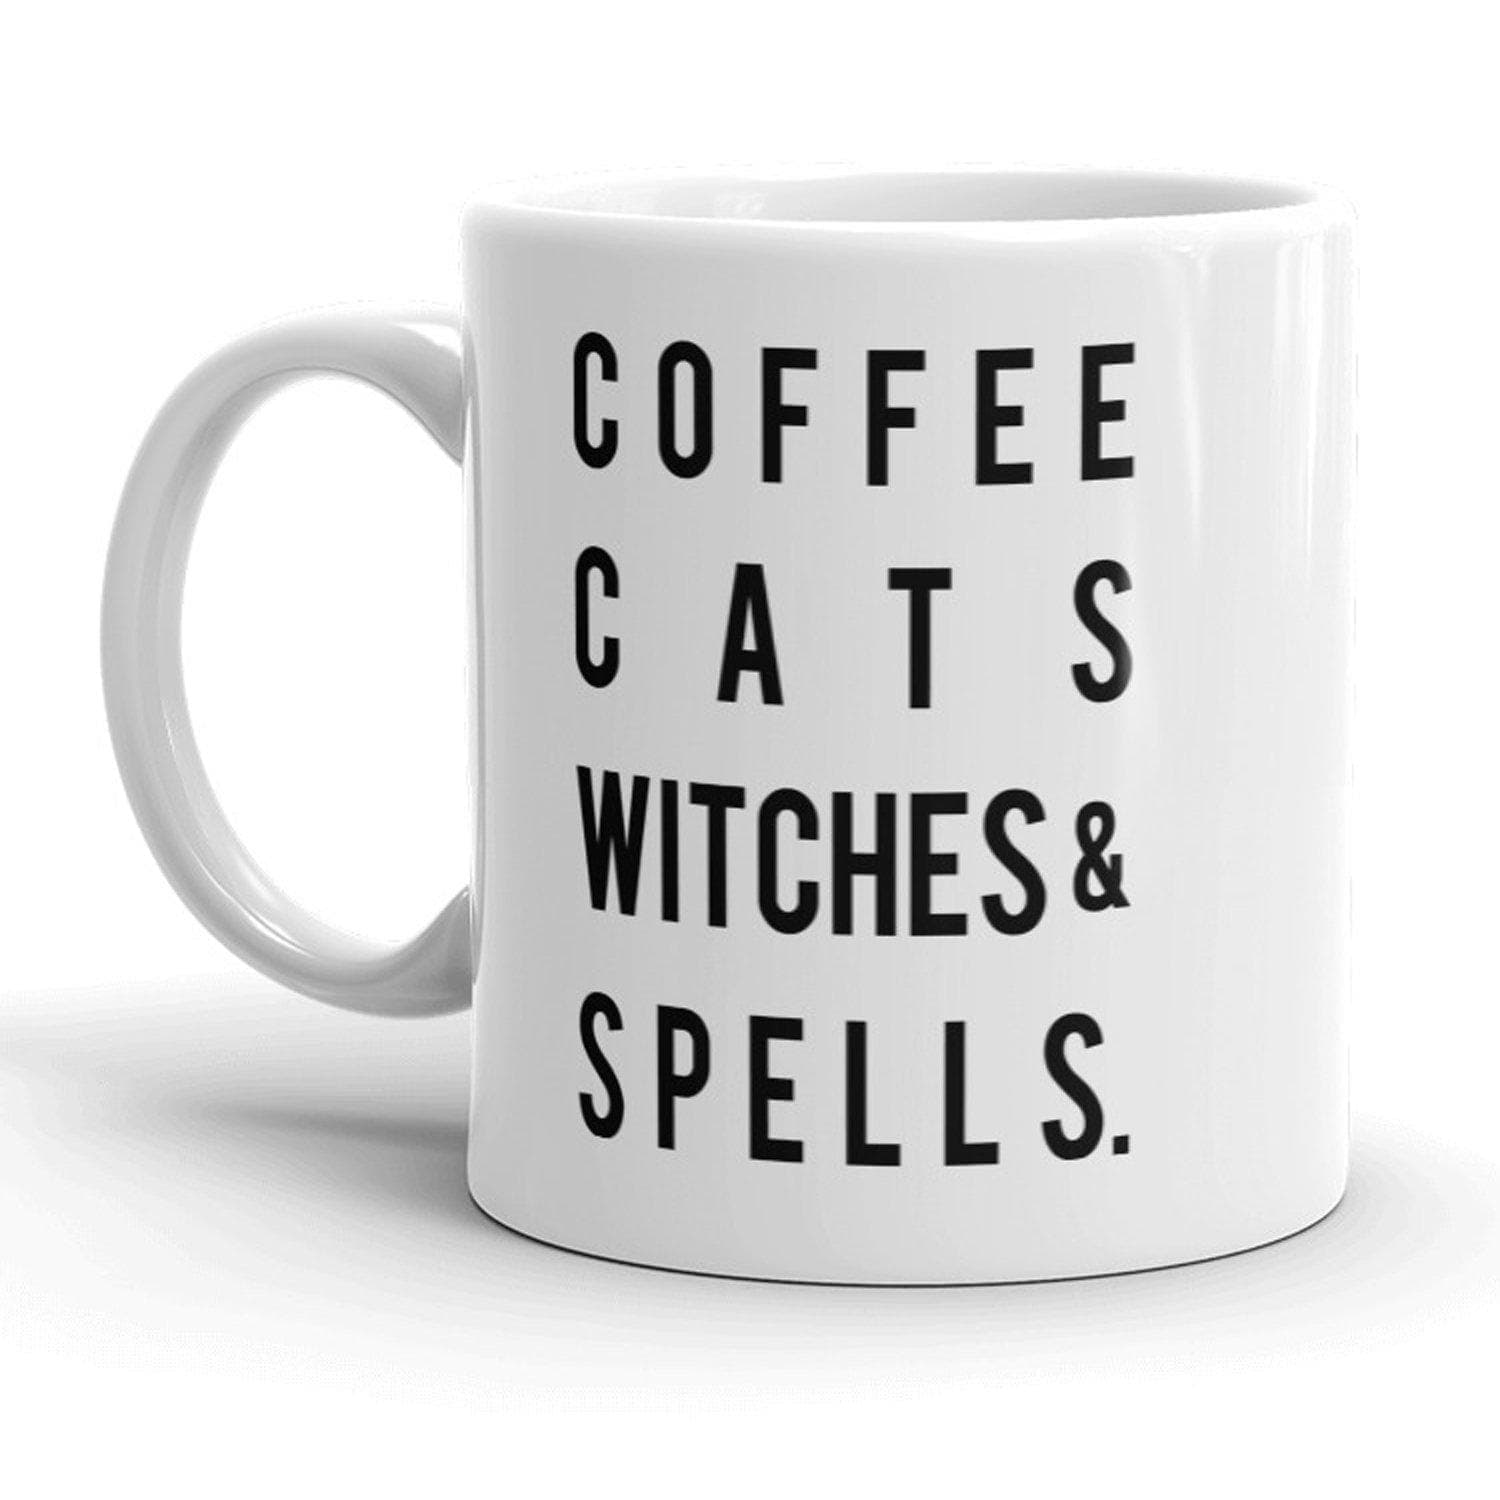 Coffee Cats Witches And Spells Mug - Crazy Dog T-Shirts